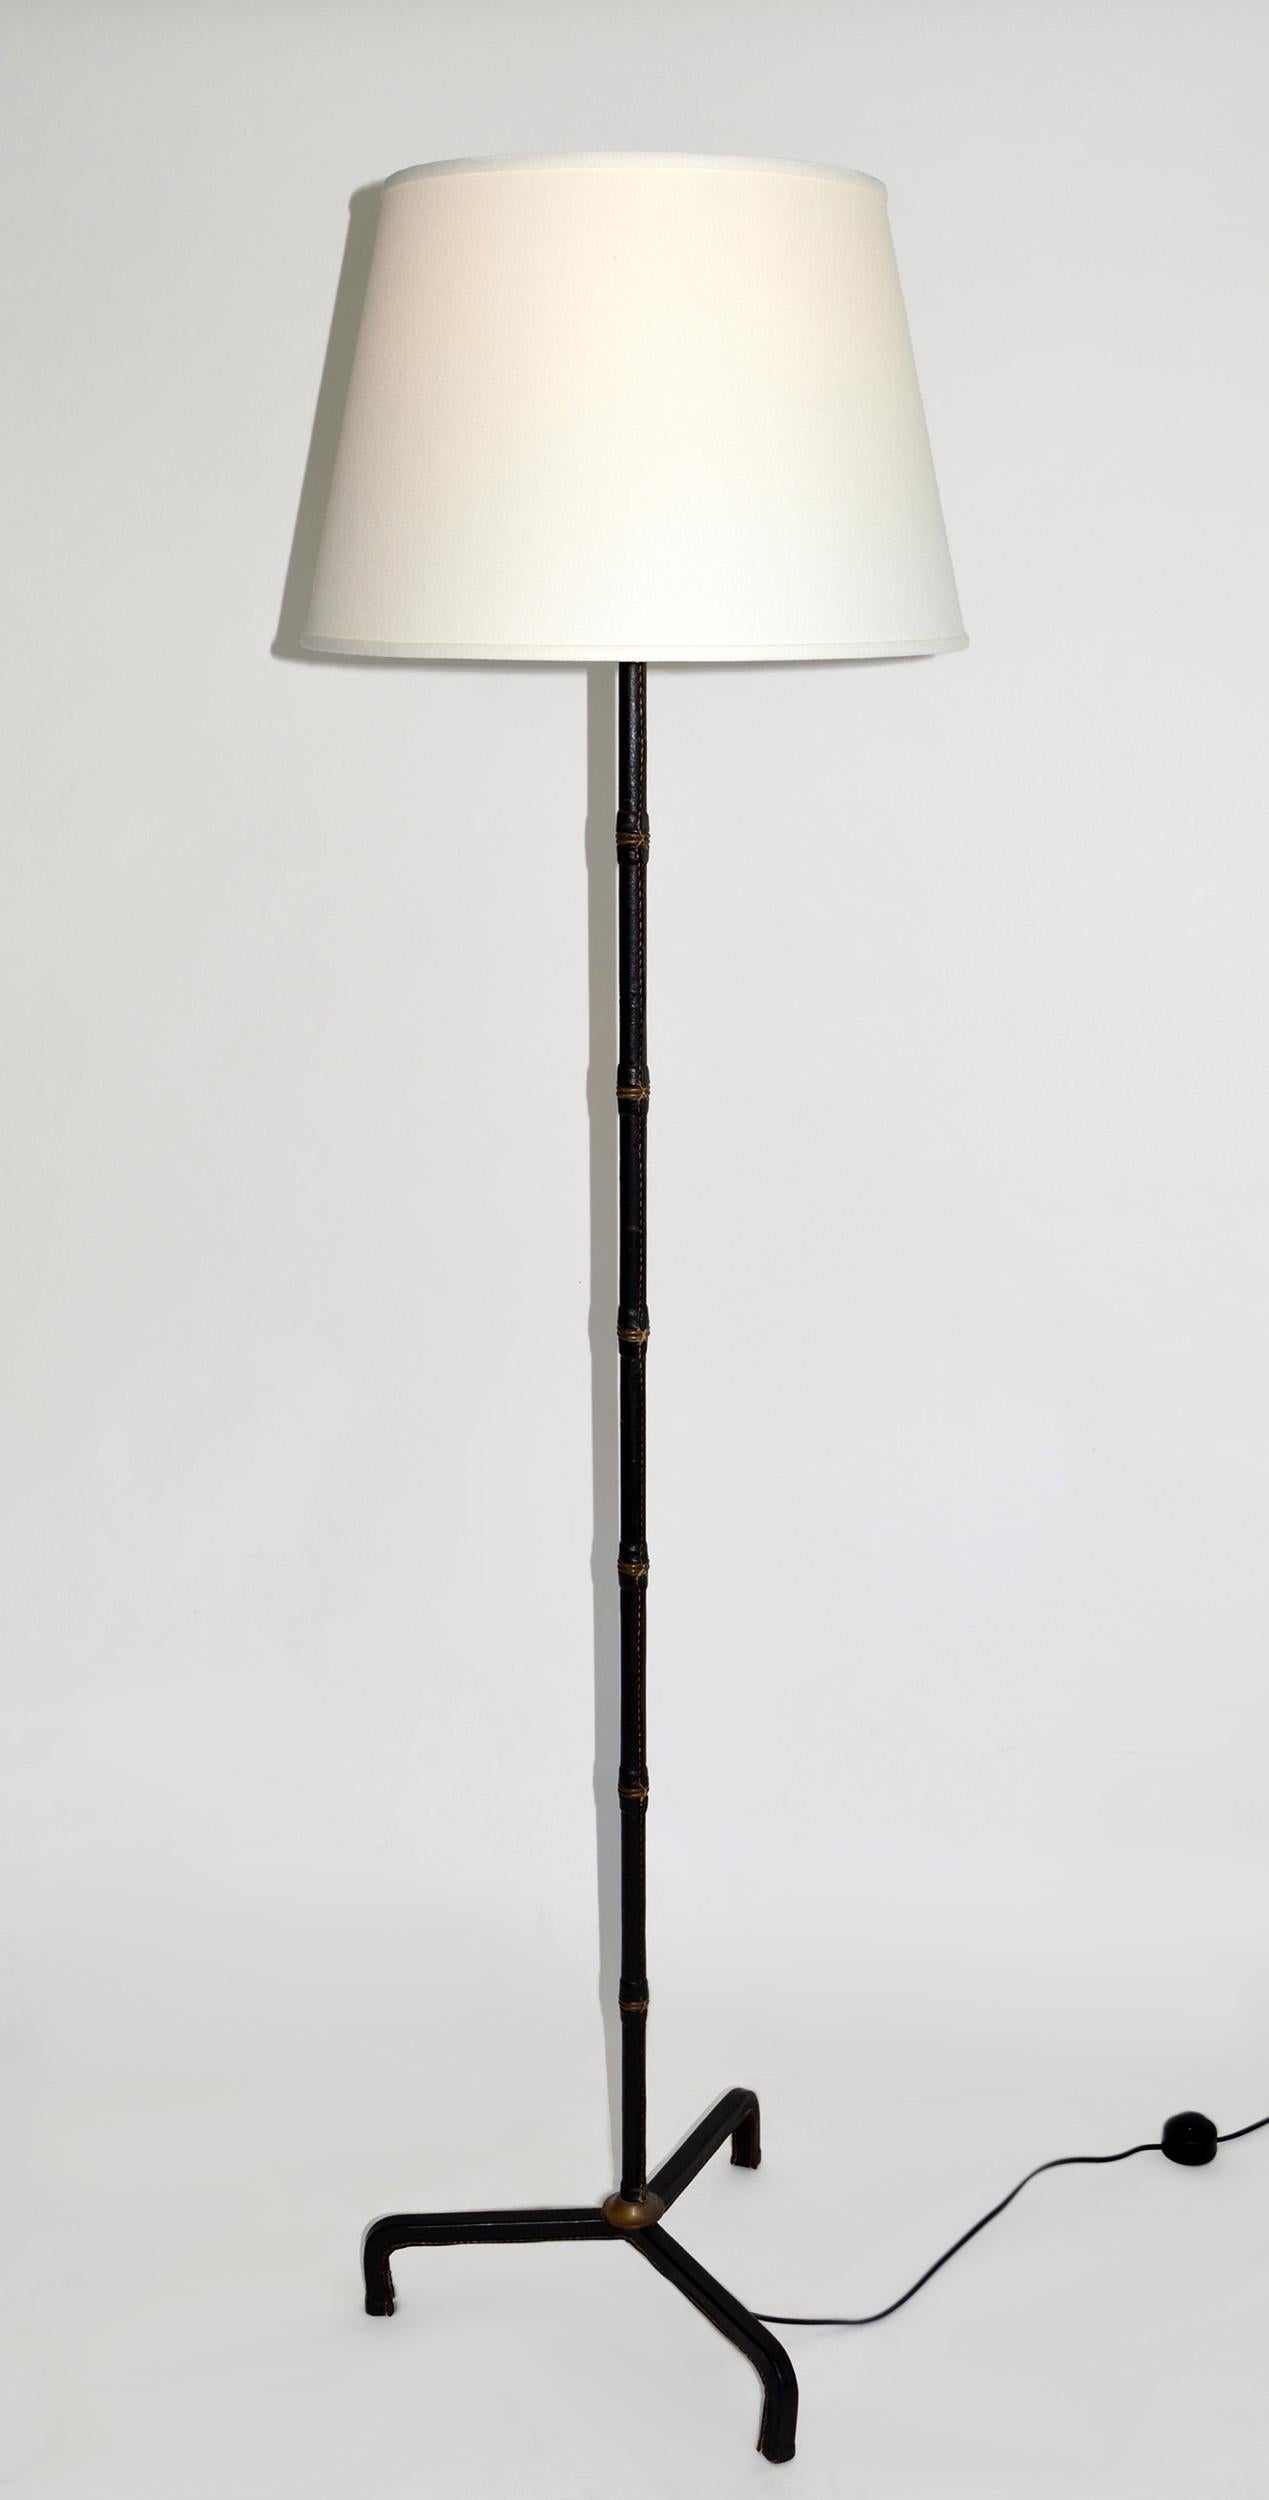 Mid-Century Modern Jacques Adnet Leather Wrapped Floor Lamp, France c. 1950 For Sale